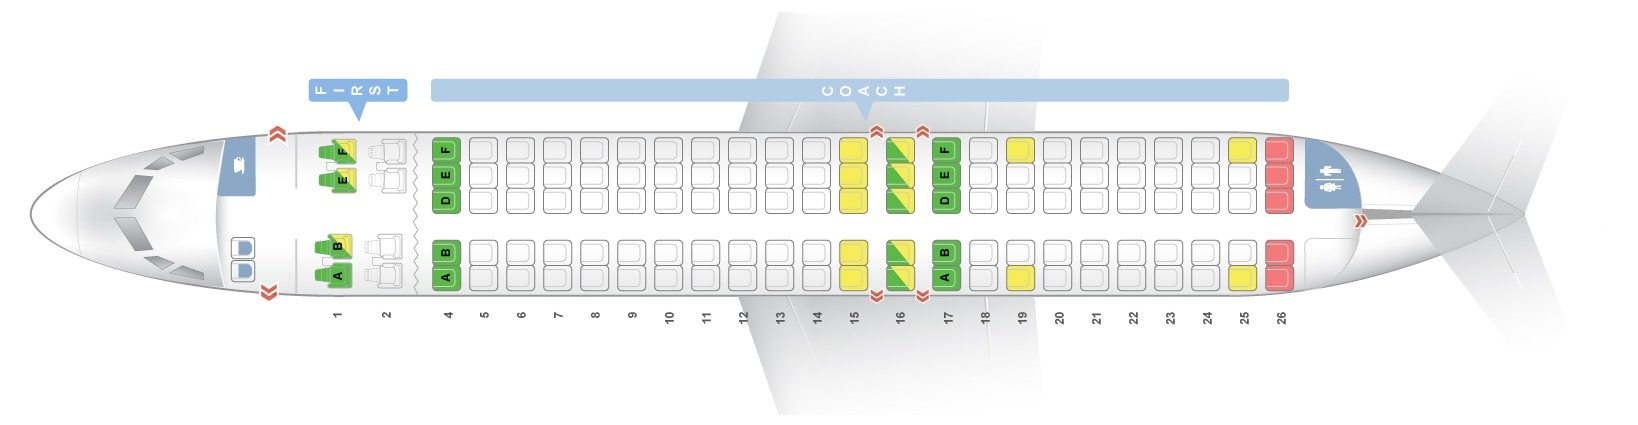 Seat map Boeing 717-200 Hawaiian Airlines. Best seats in the plane